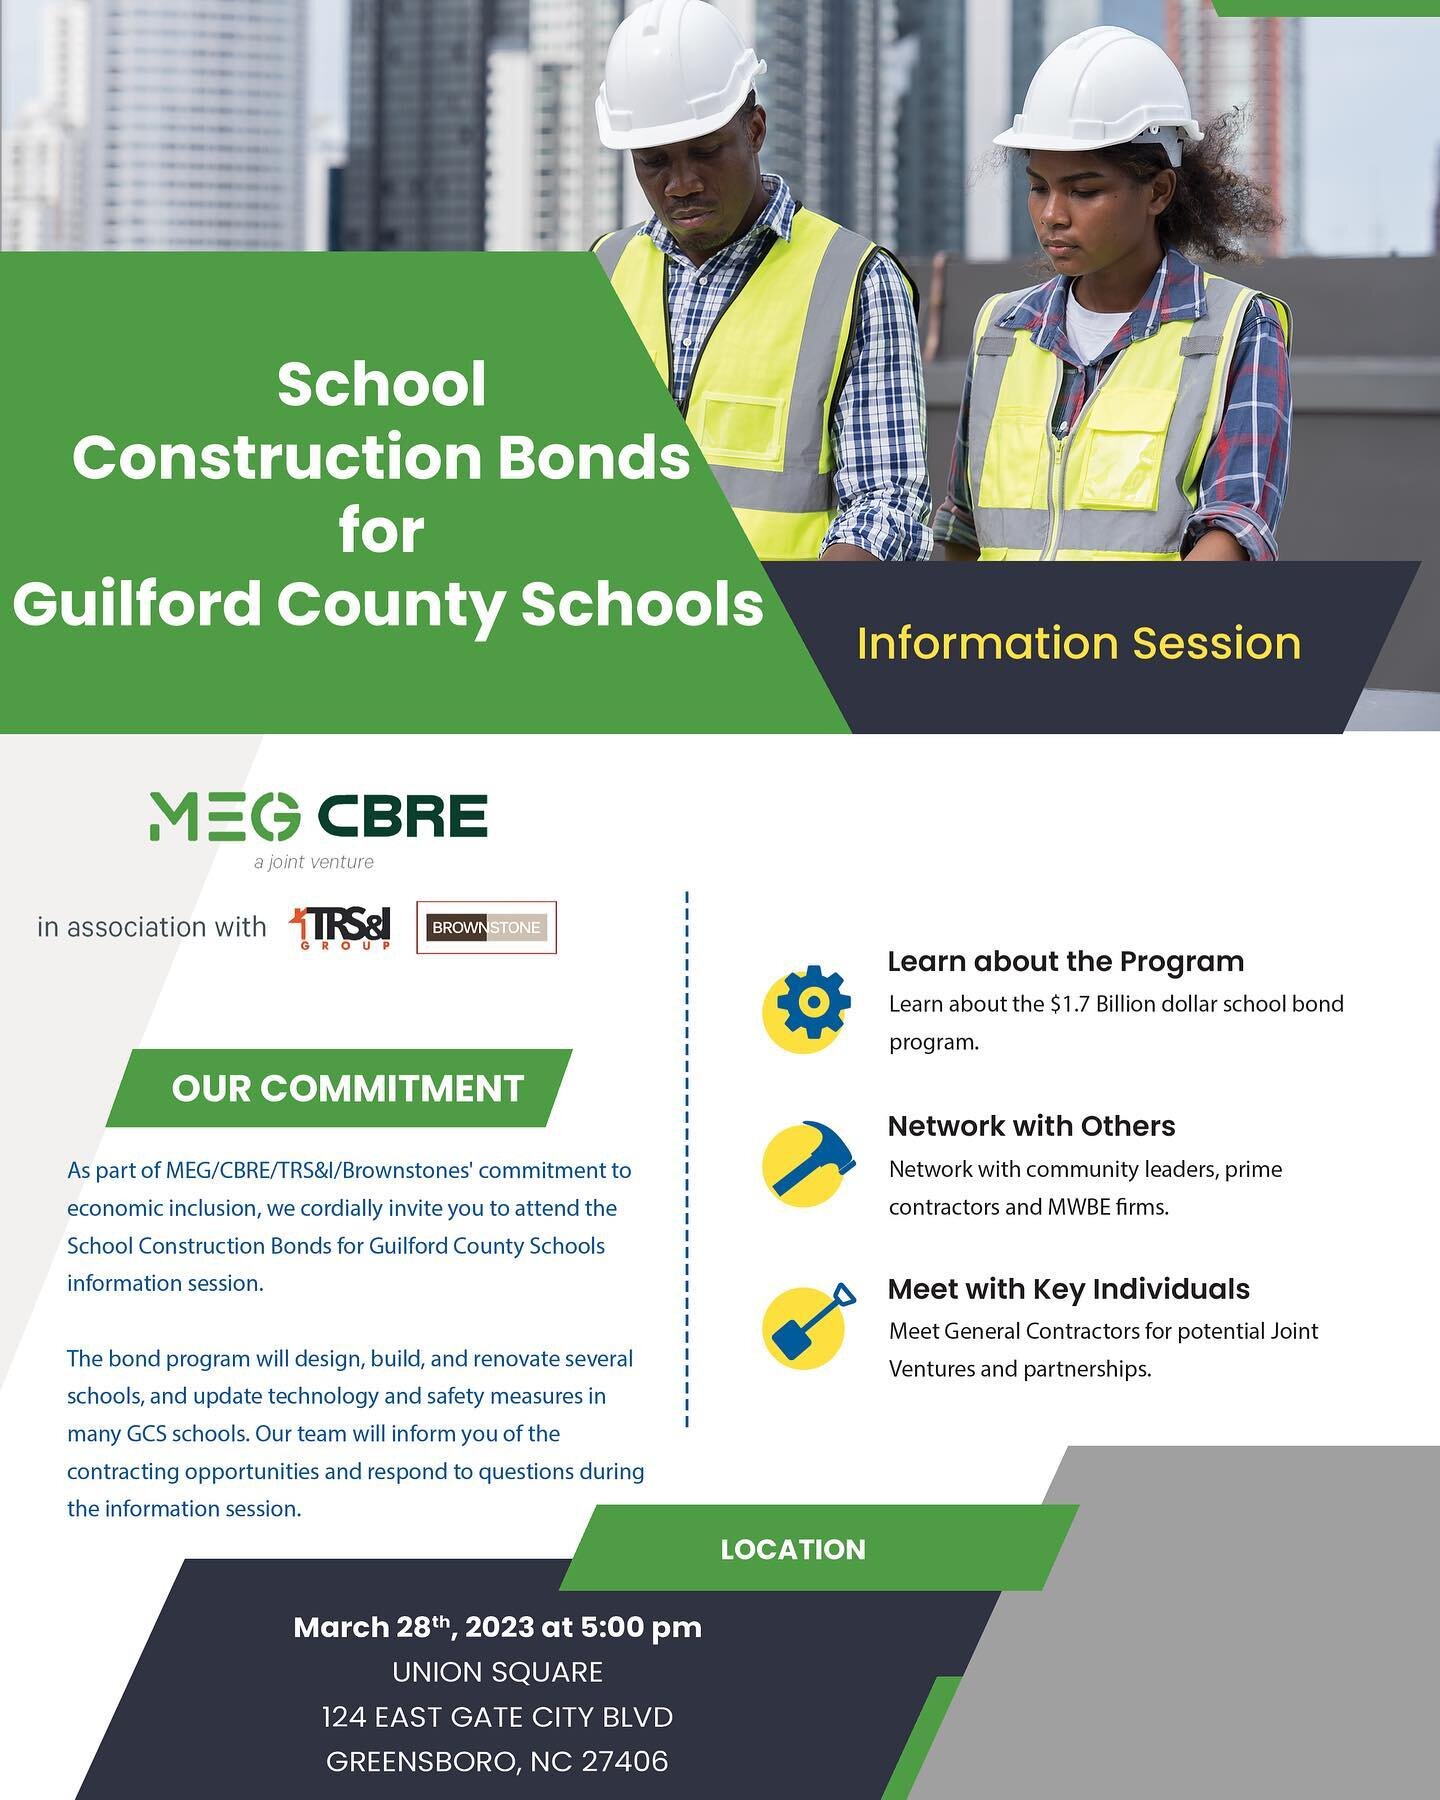 Meet us tomorrow in Greensboro, NC where our team will be hosting an information and outreach session on the Guilford County Schools $1.78 billion Bond Program. Check out &quot;School Construction Bonds for Guilford County Schools&quot; on Eventbrite